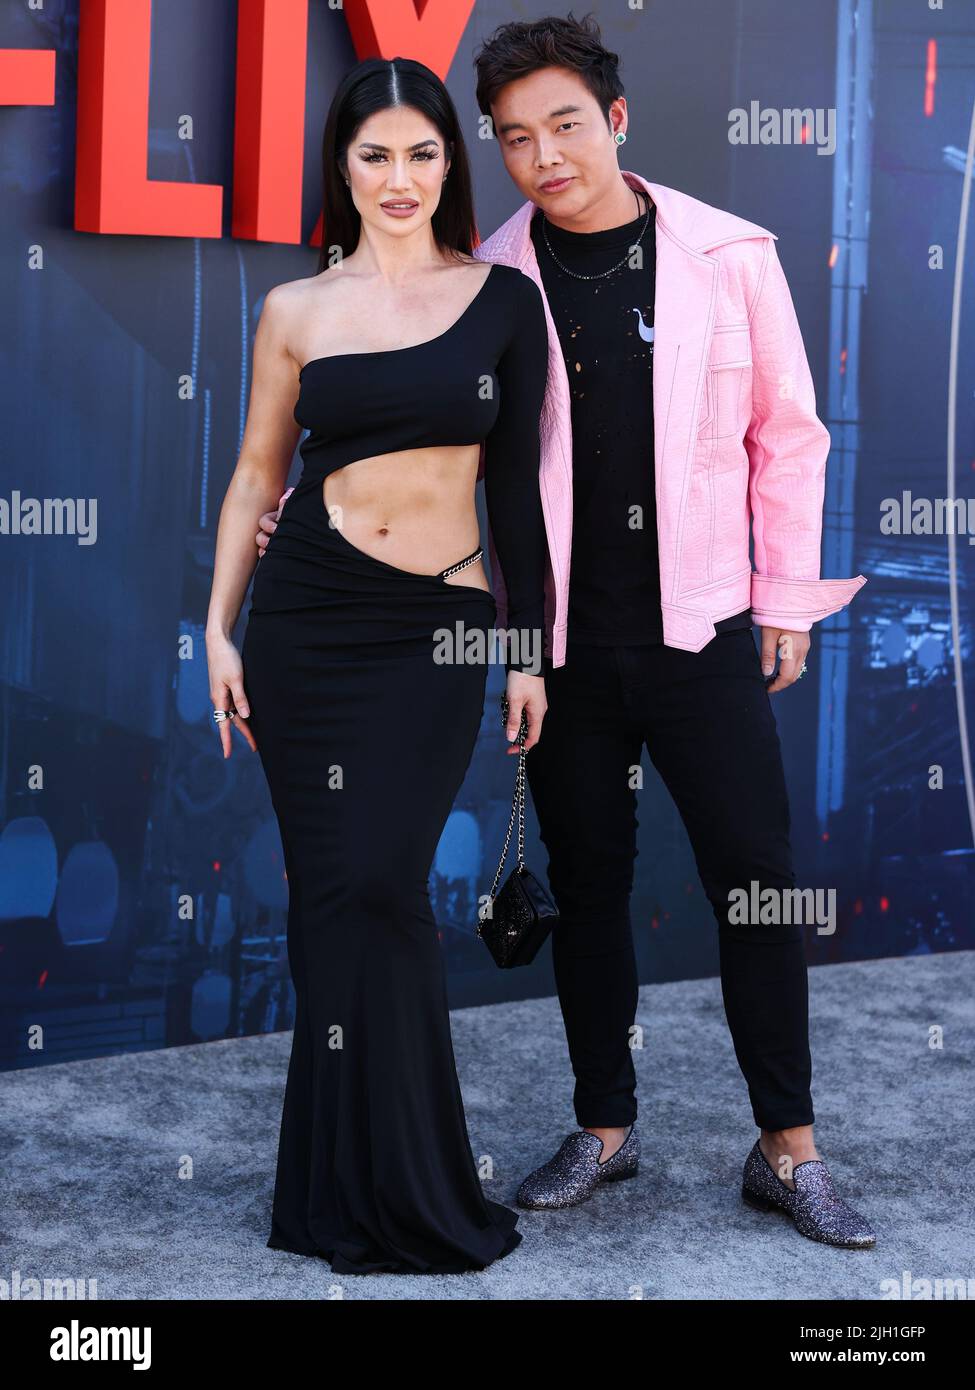 HOLLYWOOD, LOS ANGELES, CALIFORNIA, USA - JULY 13: American actress Kim Lee and Kane Lim arrive at the World Premiere Of Netflix's 'The Gray Man' held at the TCL Chinese Theatre IMAX on July 13, 2022 in Hollywood, Los Angeles, California, United States. (Photo by Xavier Collin/Image Press Agency) Stock Photo